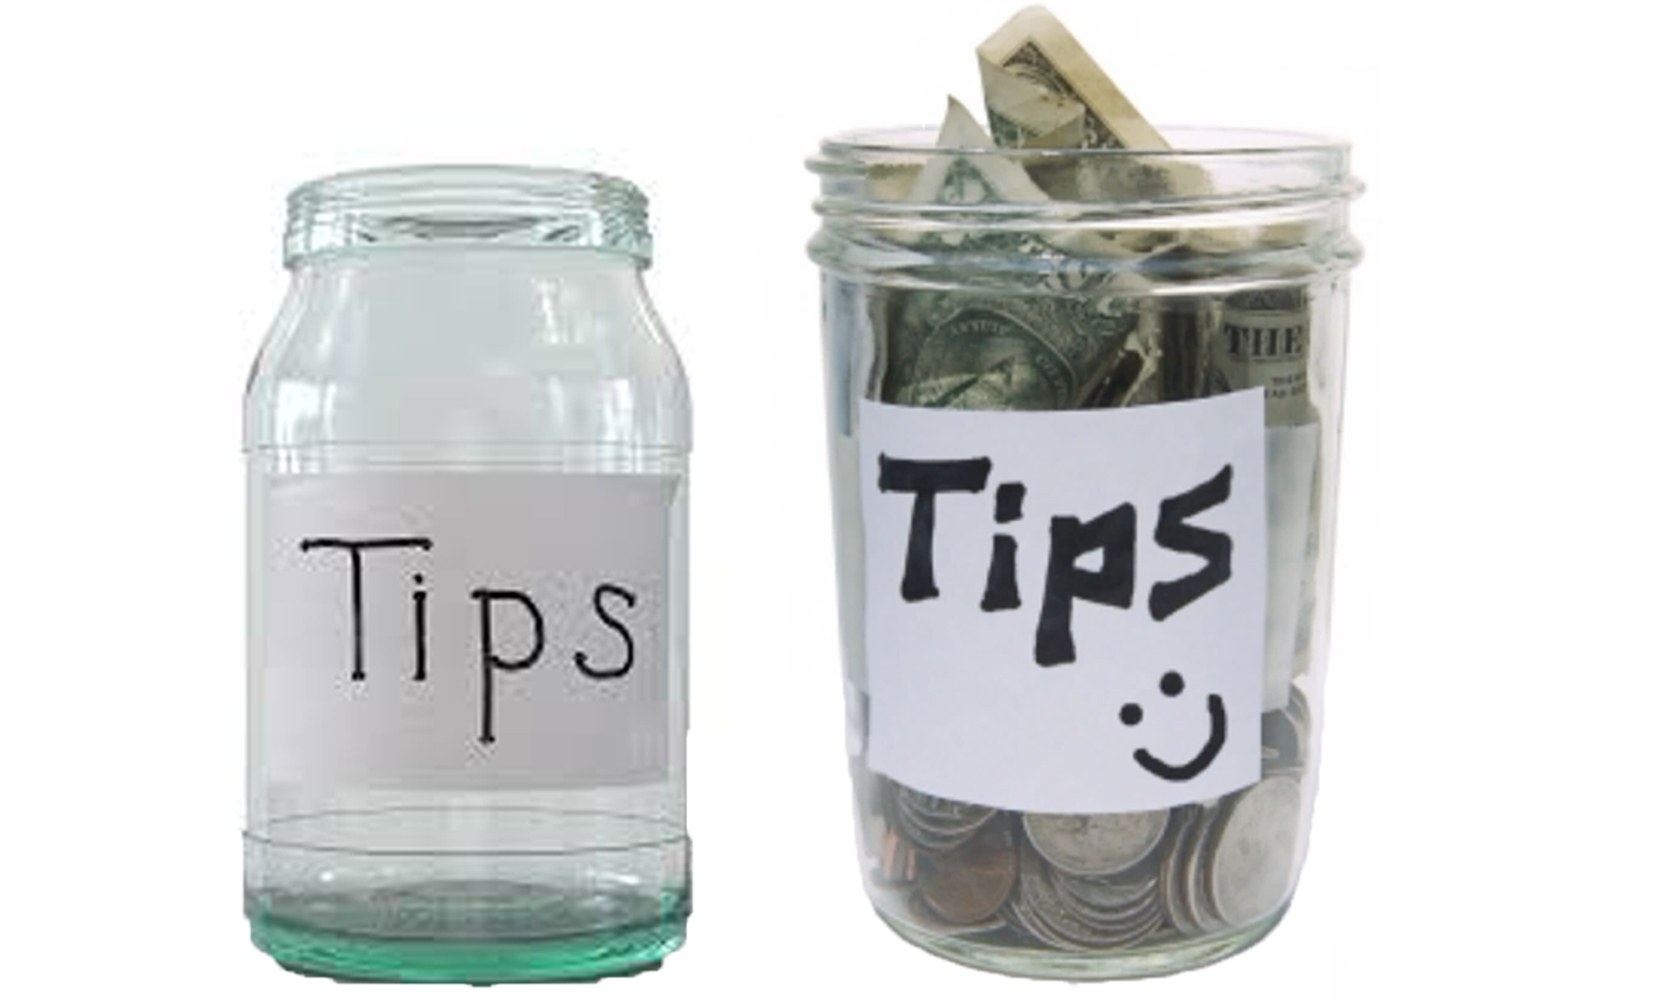 How to get more TIPS at Gigs